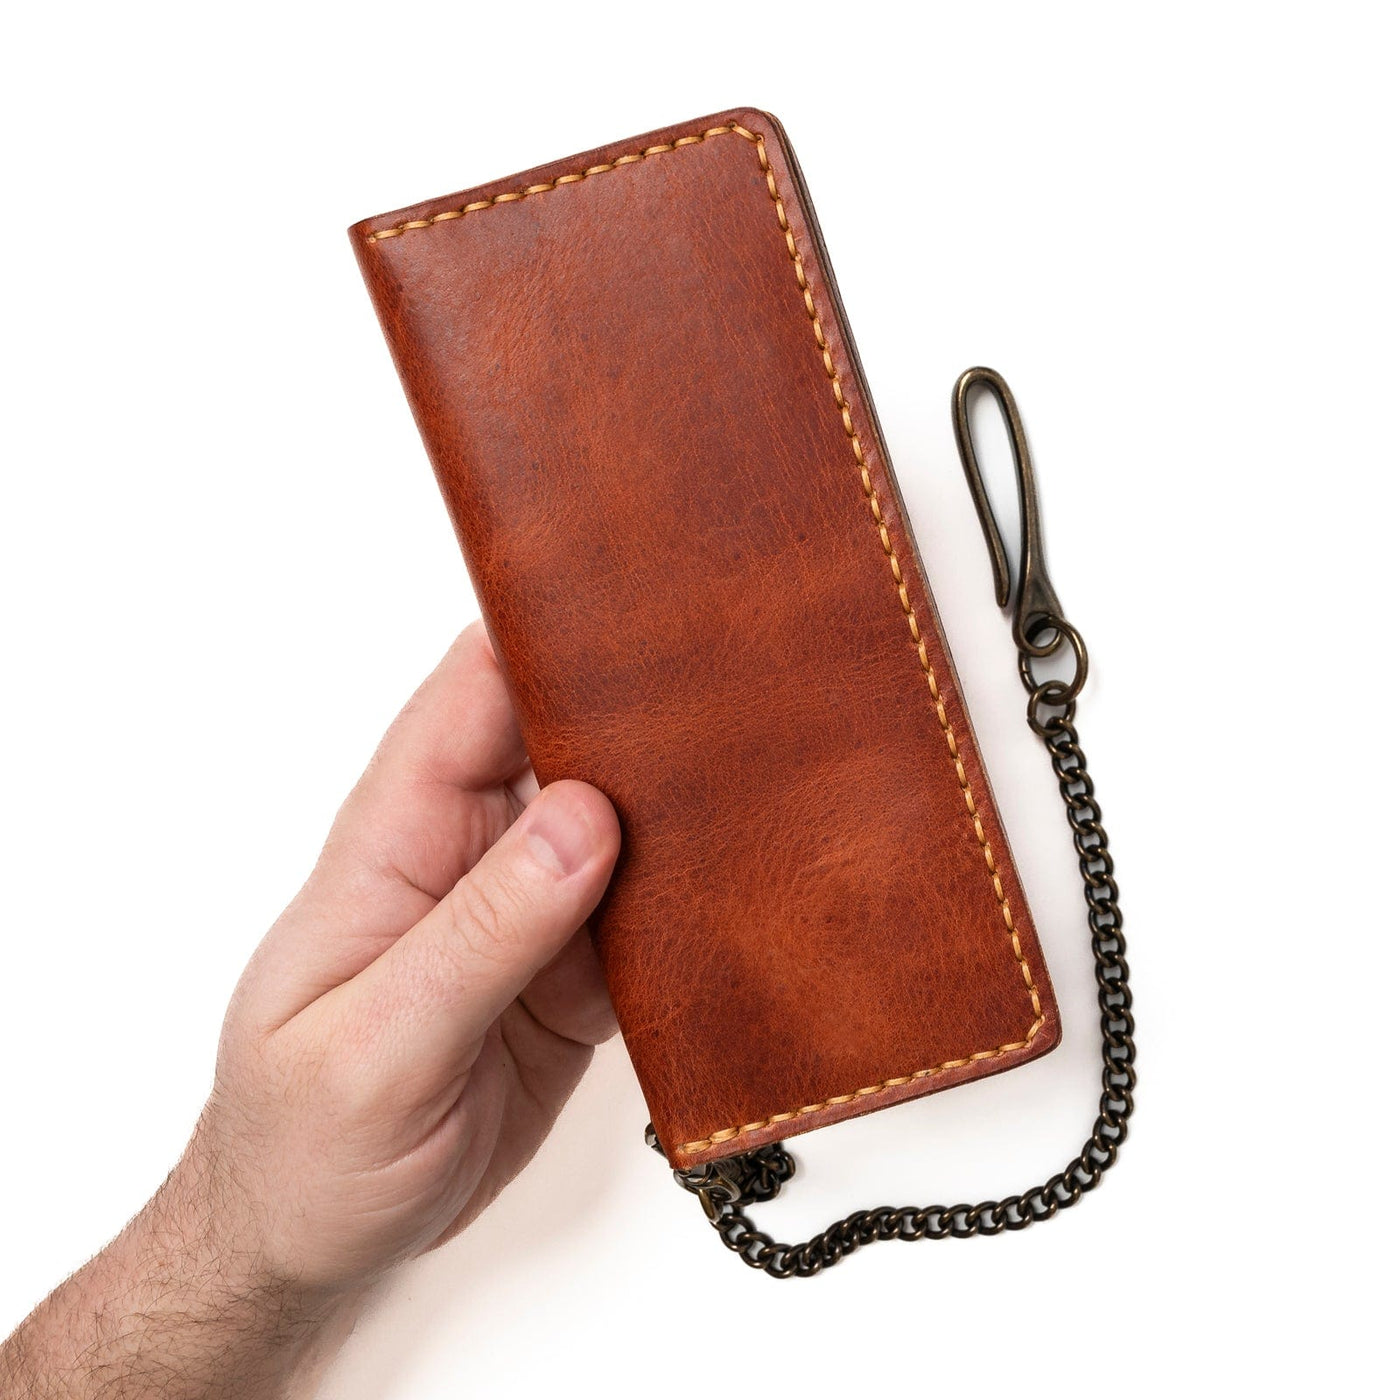 Leather Long Wallet - English Tan Popov Leather